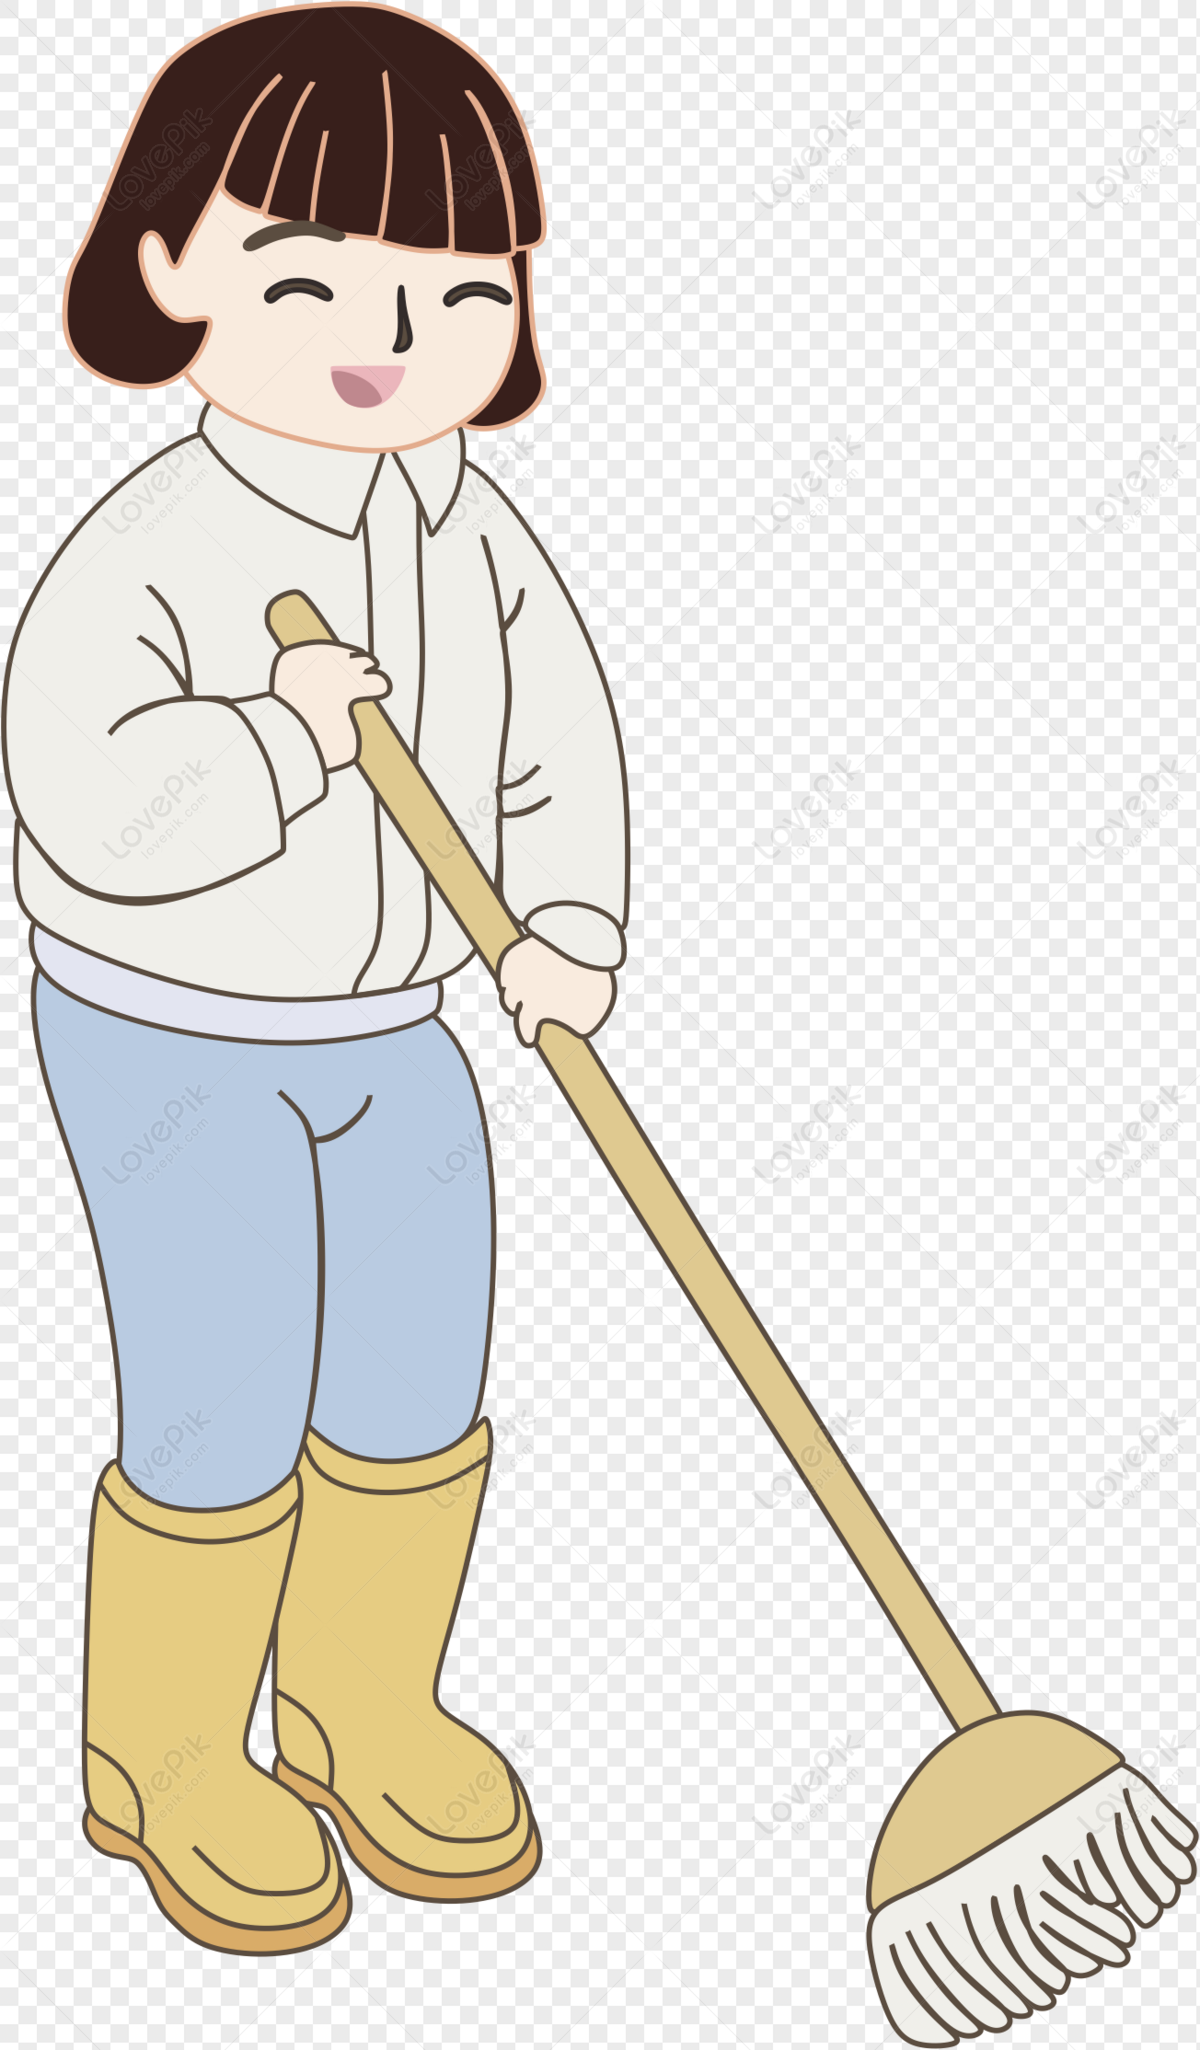 Cleaning Girl PNG Hd Transparent Image And Clipart Image For Free Download  - Lovepik | 401258444